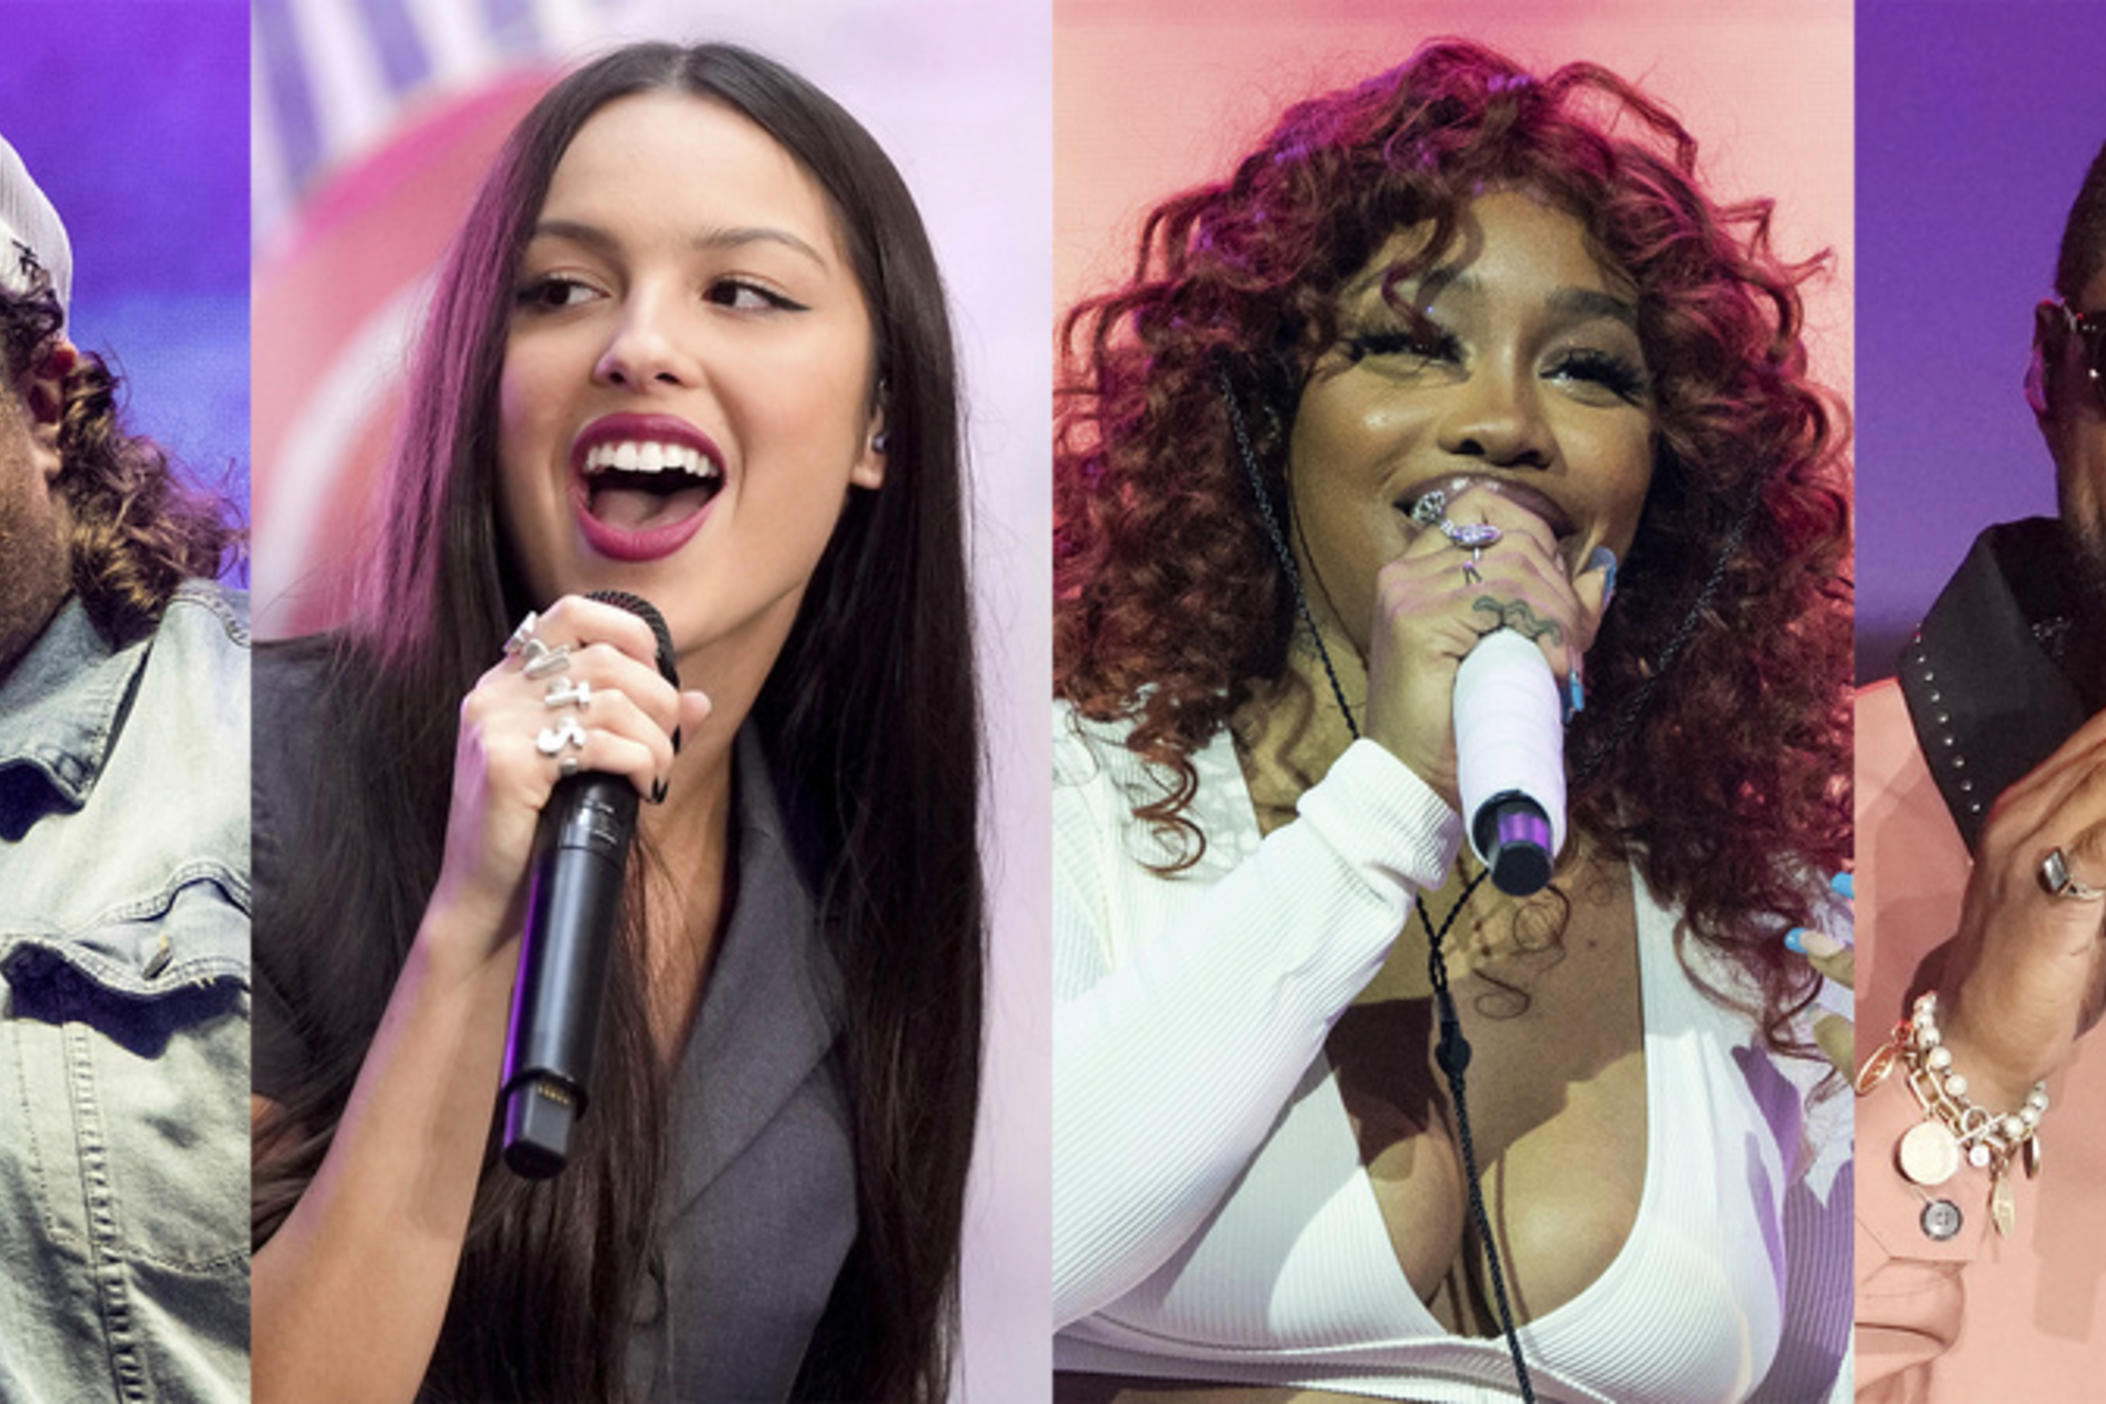 This combination of images shows, from left, Jelly Roll, Olivia Rodrigo, SZA and Usher who will perform at iHeartRadio's 2023 Jingle Ball.